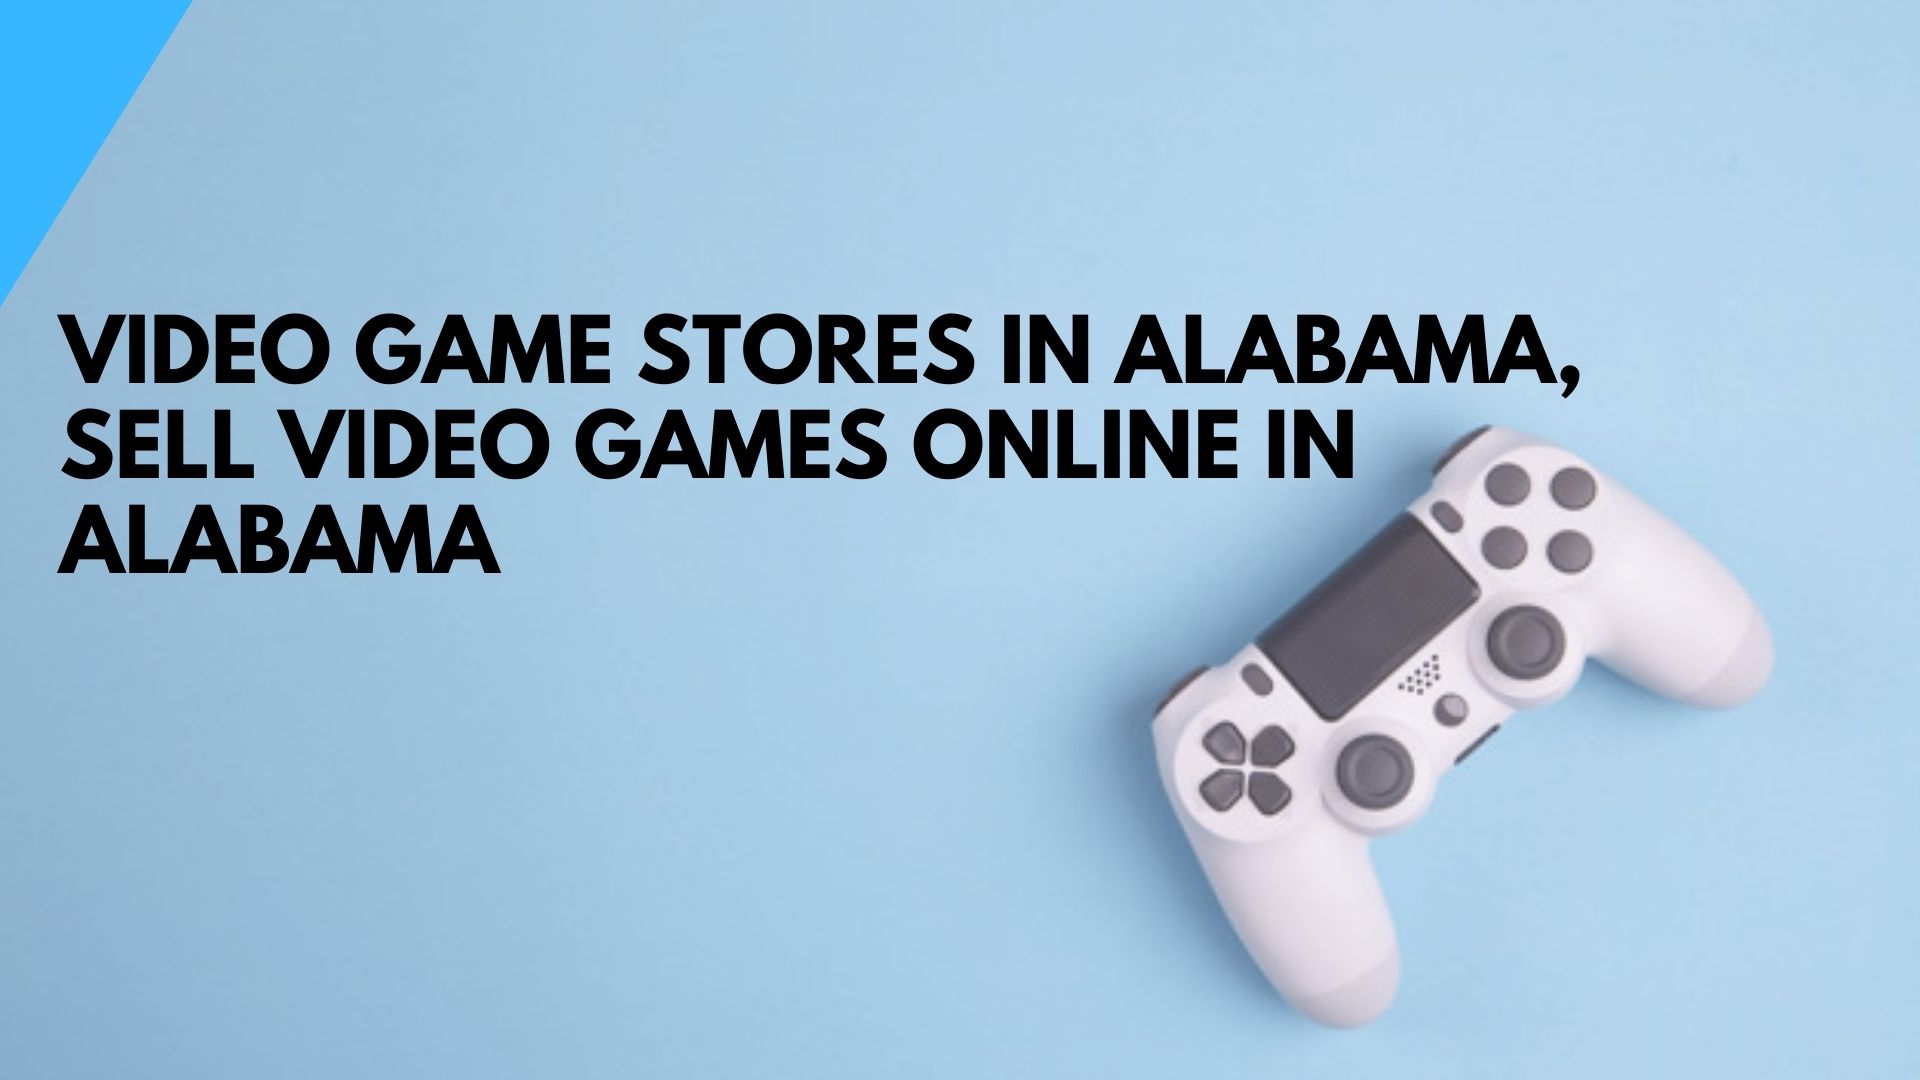 The Video Game Online Store